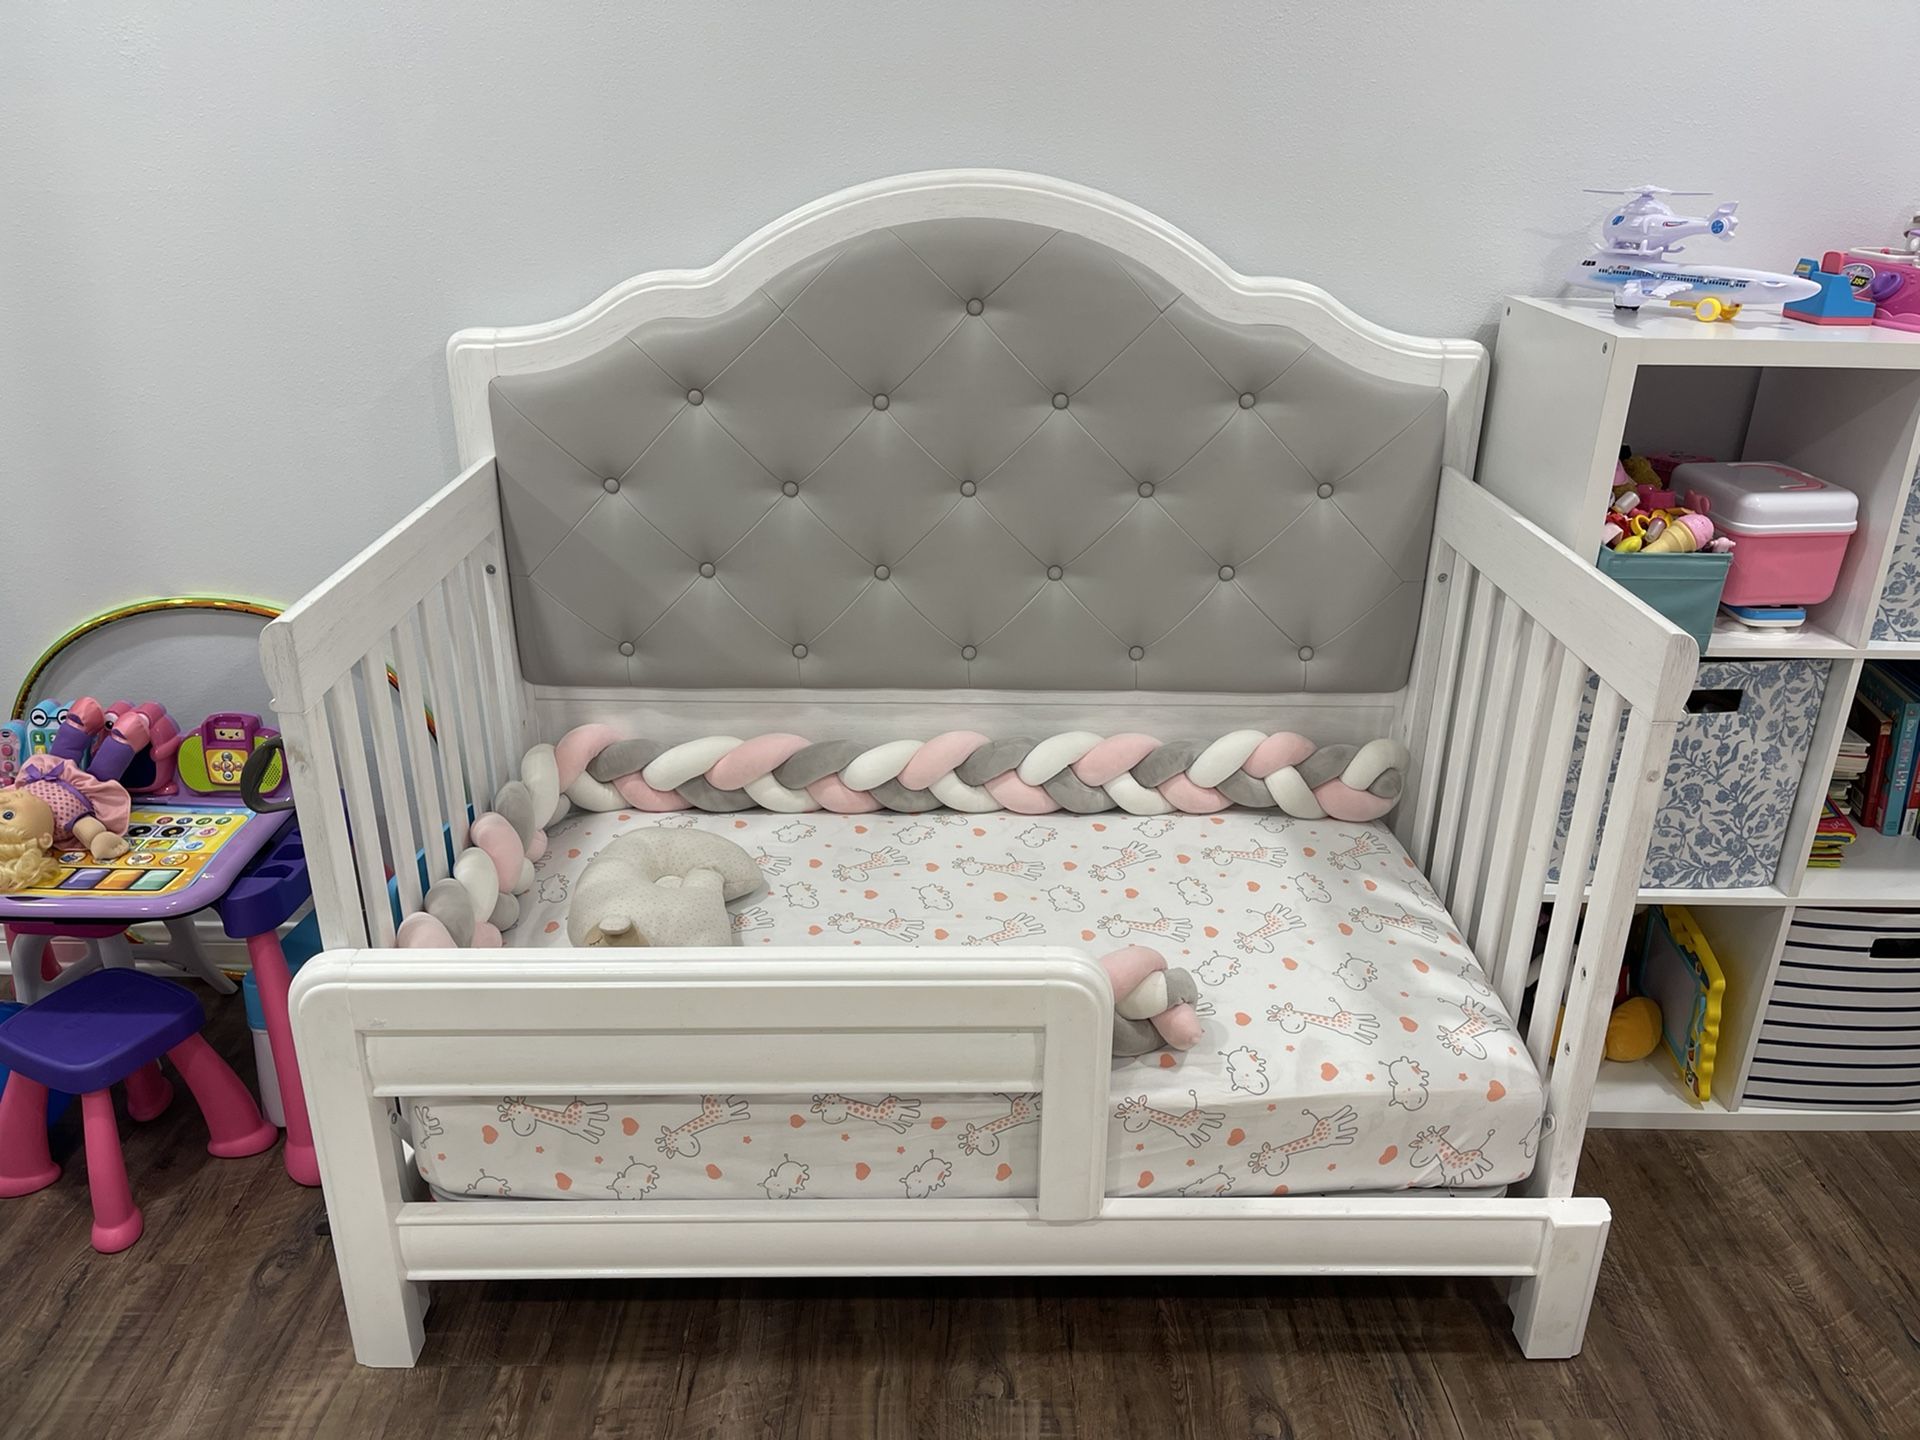 Toddler Bed. Crib Size With Mattress